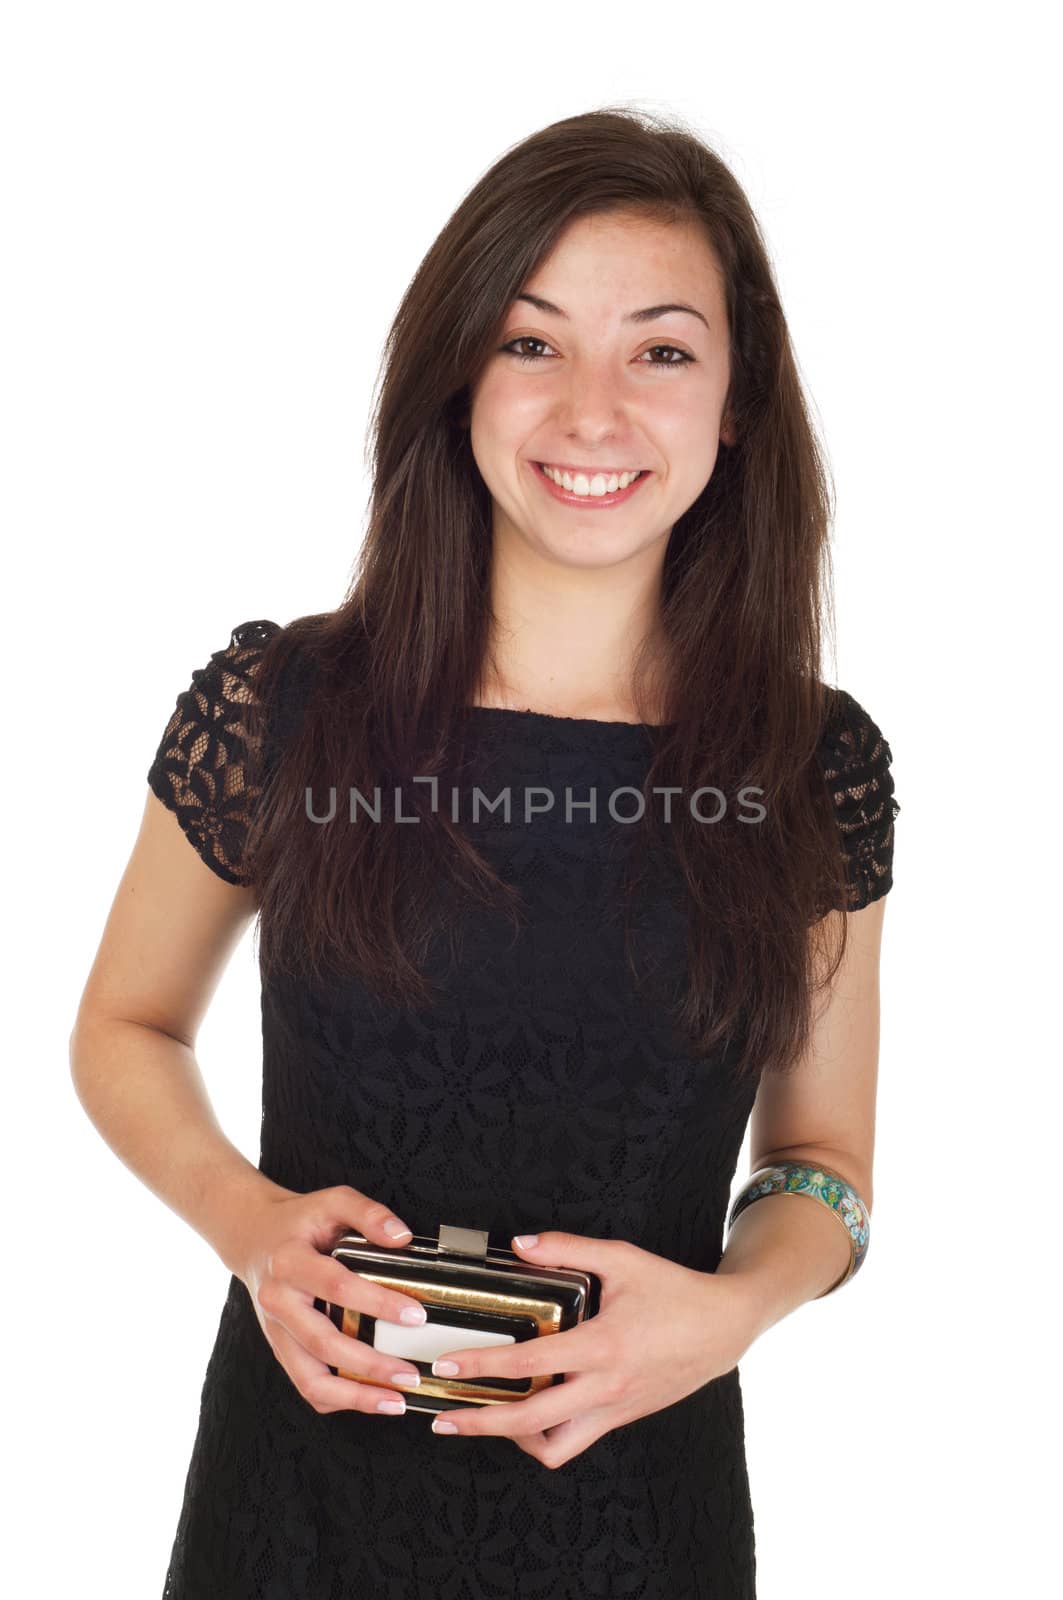 beautiful 18 years old young woman in black dress and purse ready for night out (isolated on white background)